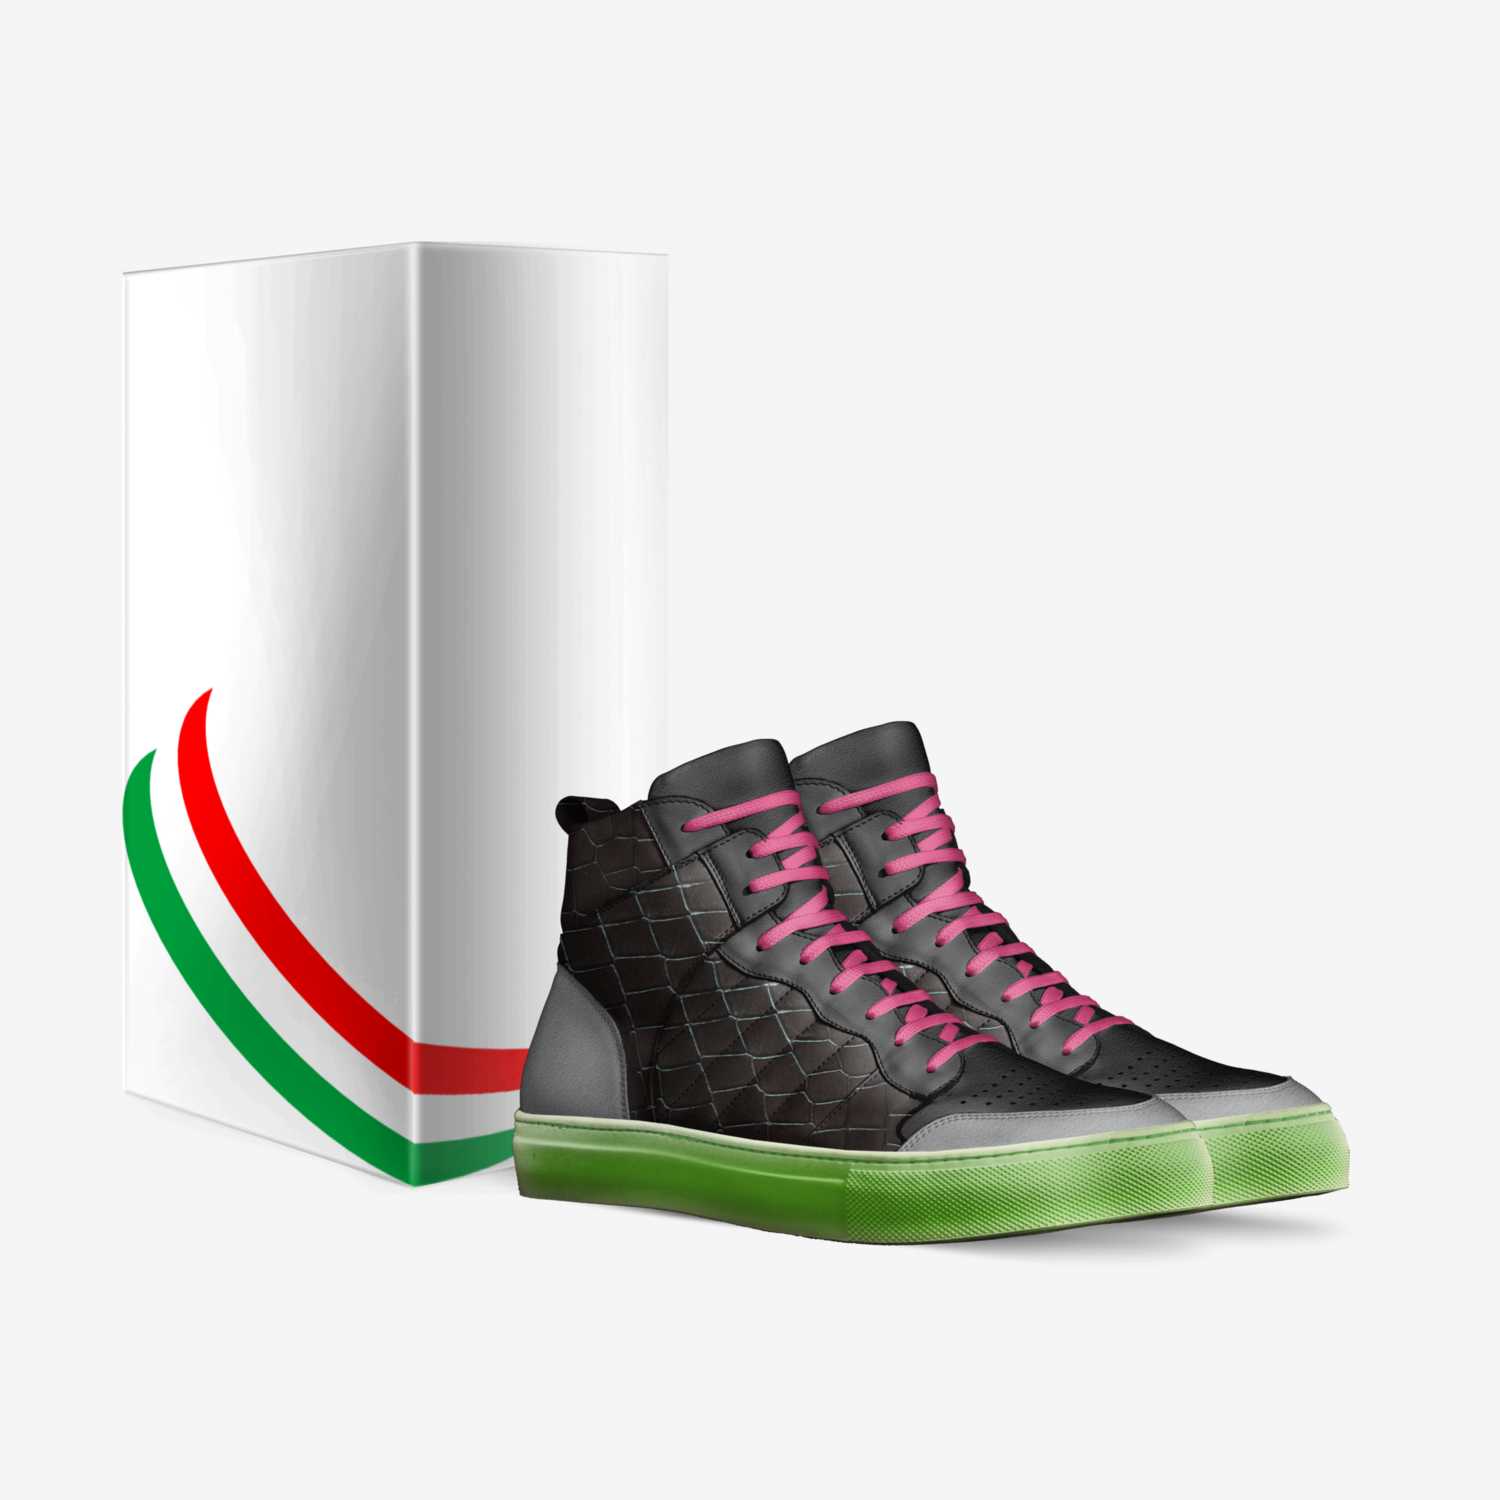 RB 2 custom made in Italy shoes by Richard Burgos | Box view